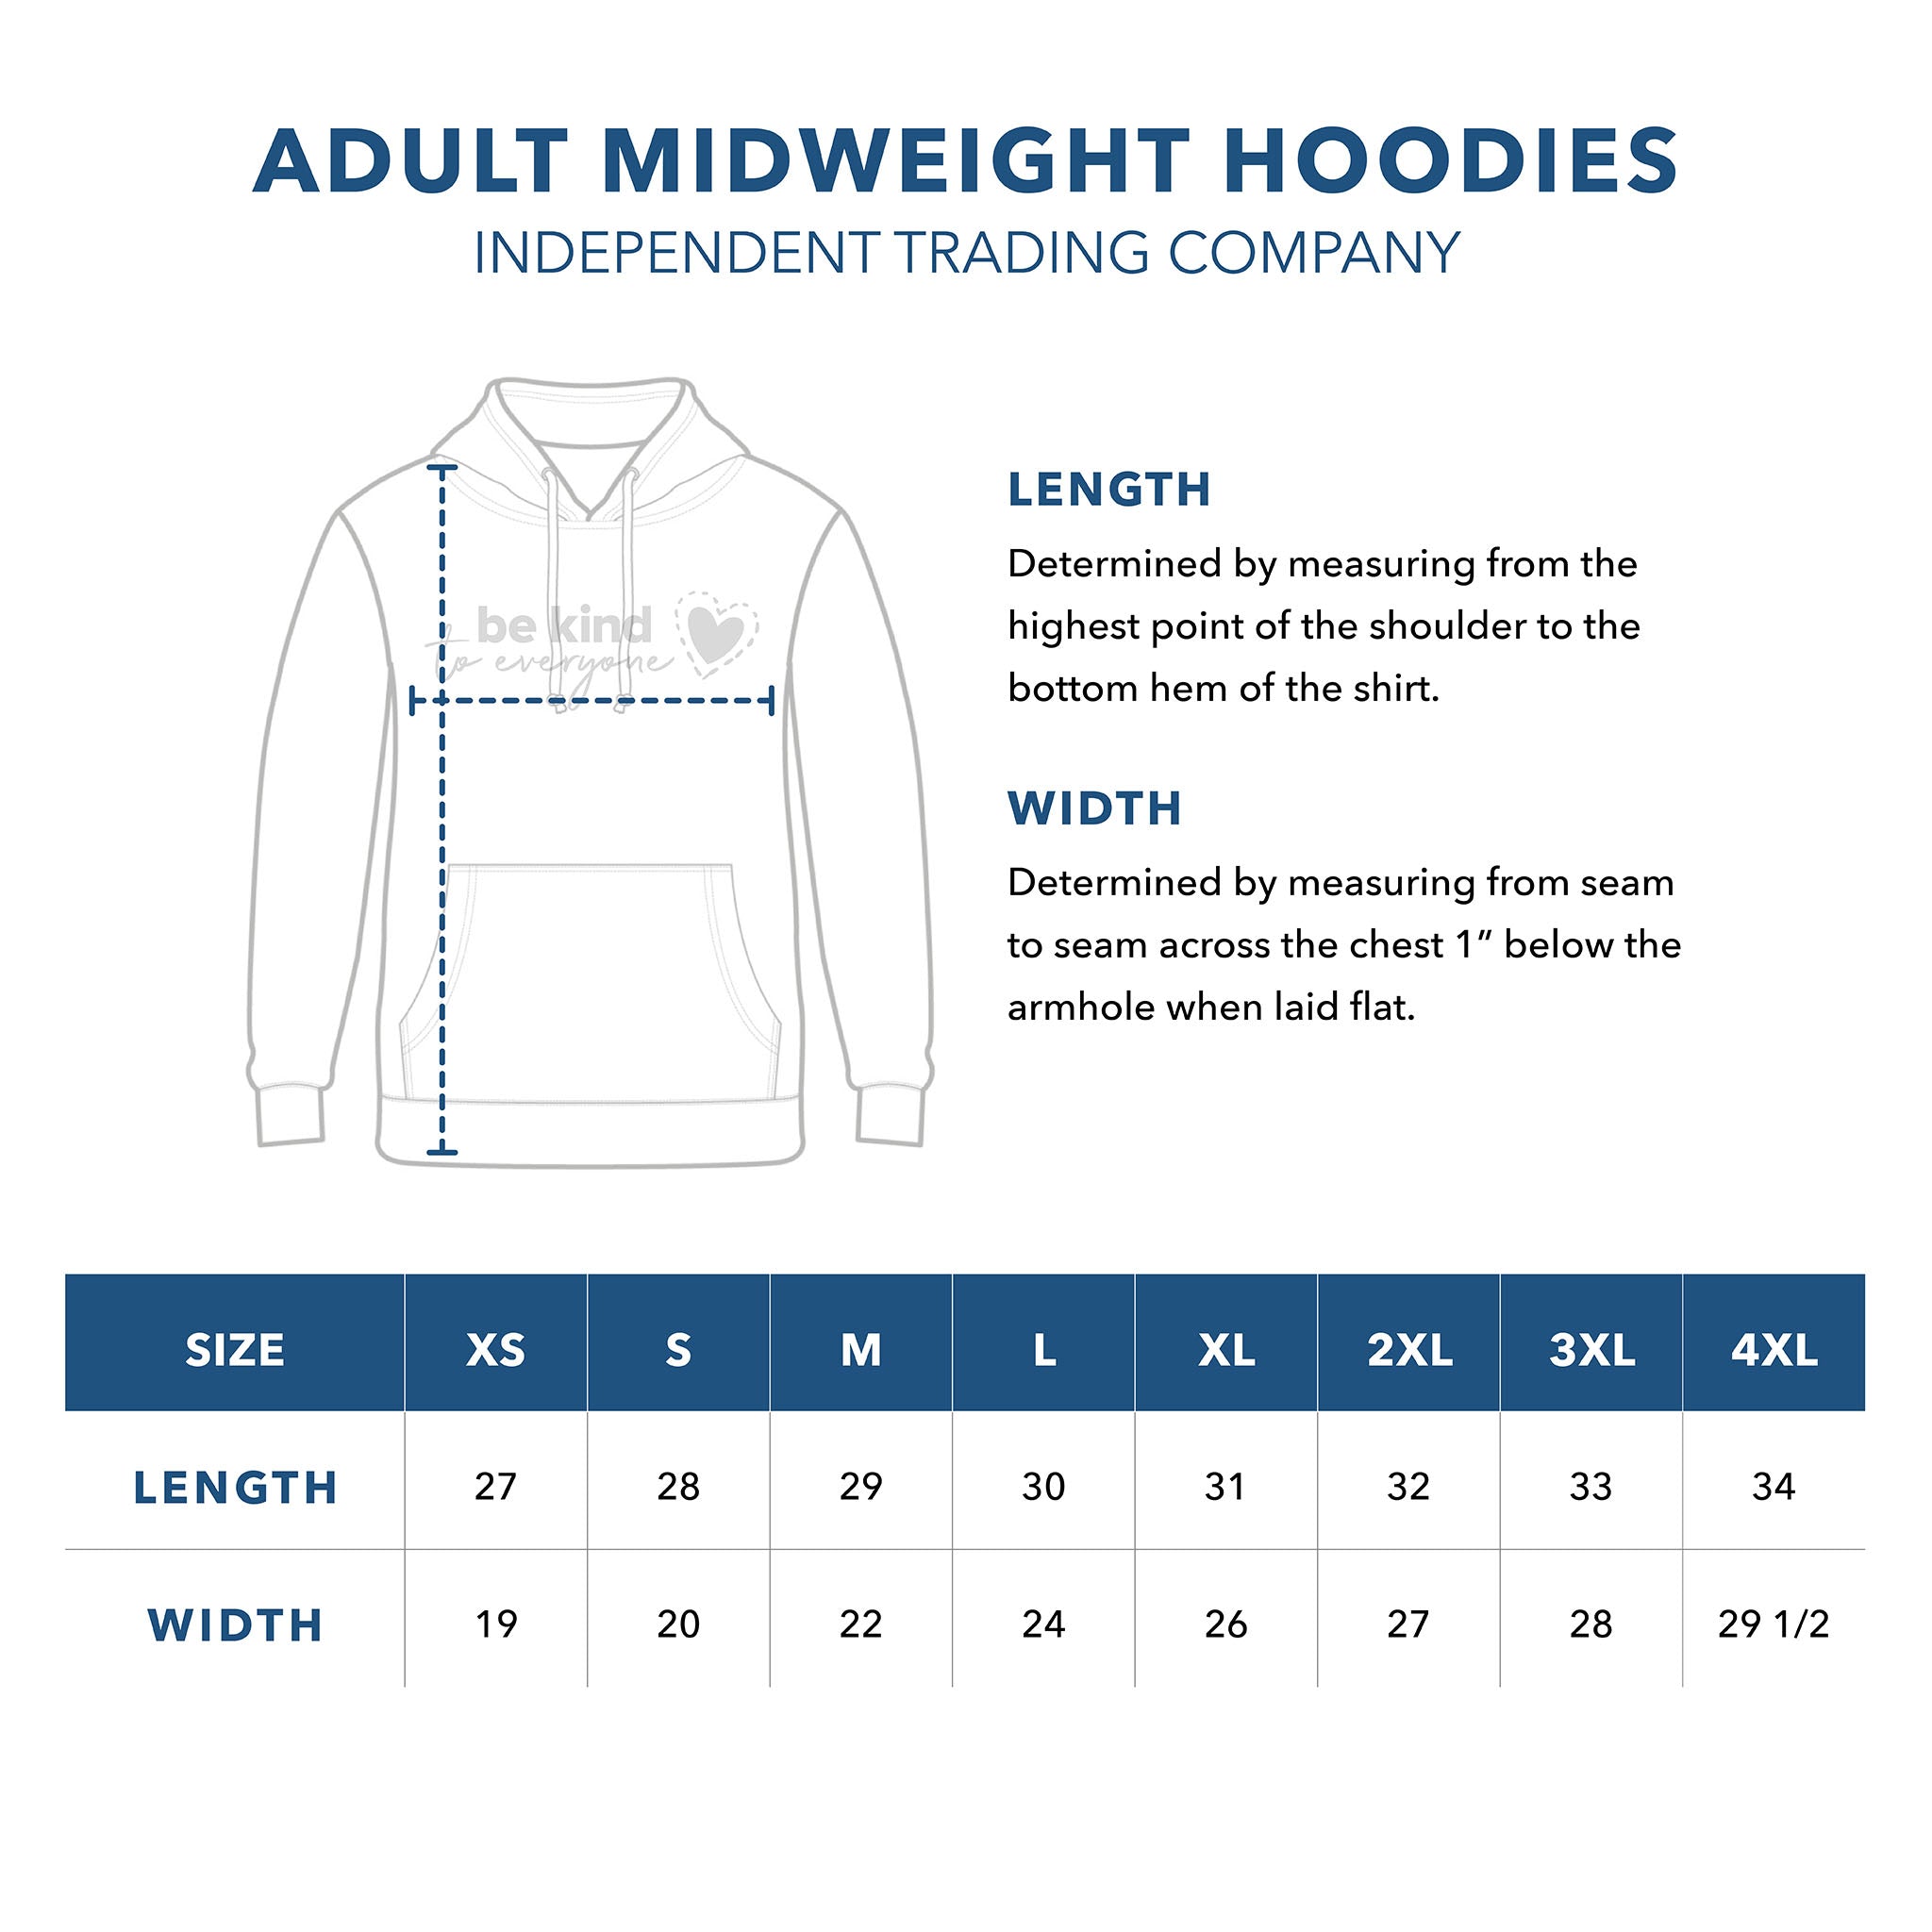 Adult Midweight Hoodie Sizing